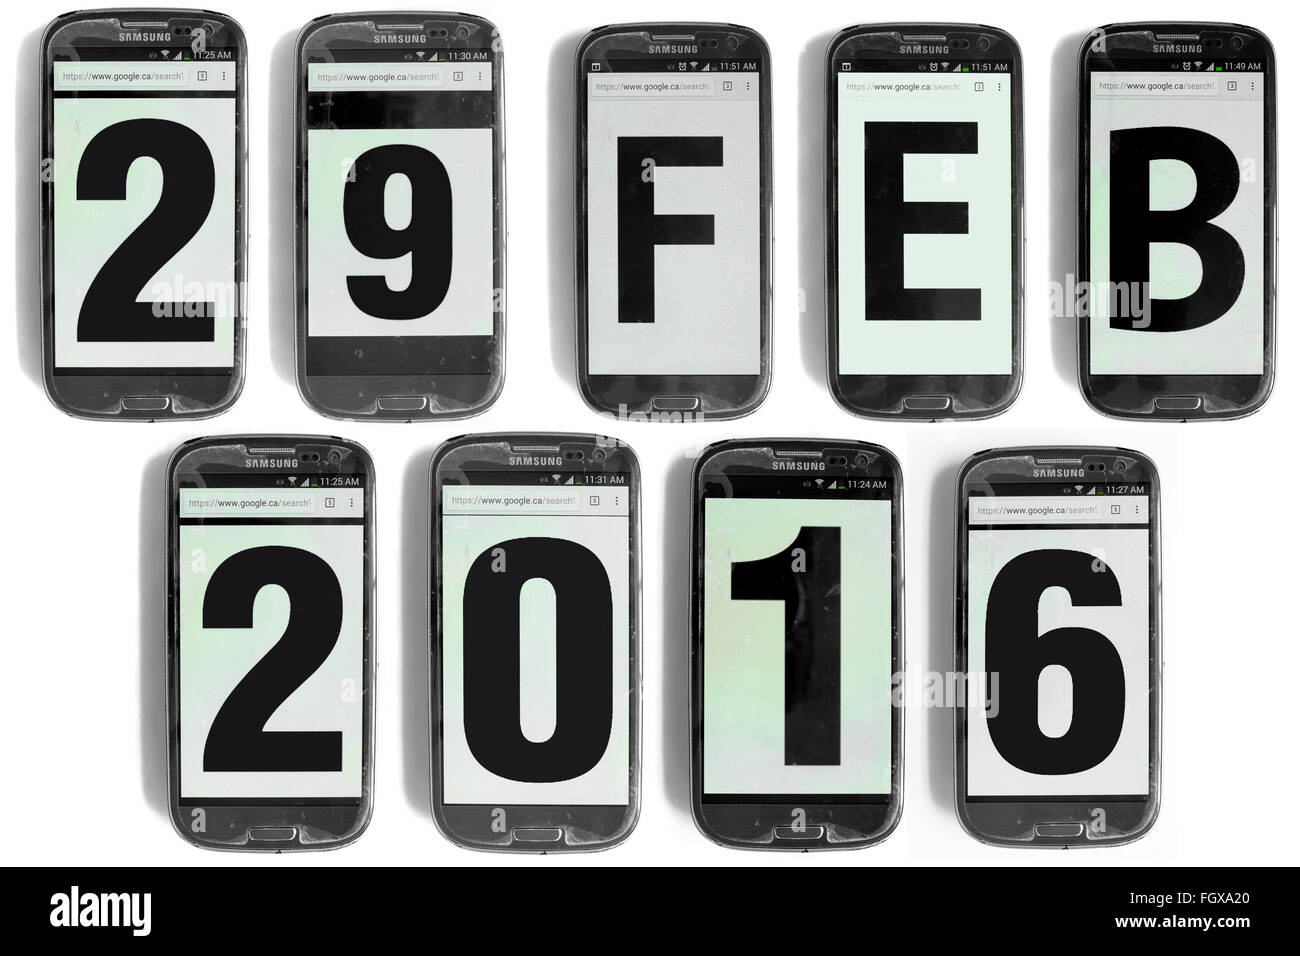 29 Feb 2016 written on the screens of smartphones photographed against a white background. Stock Photo